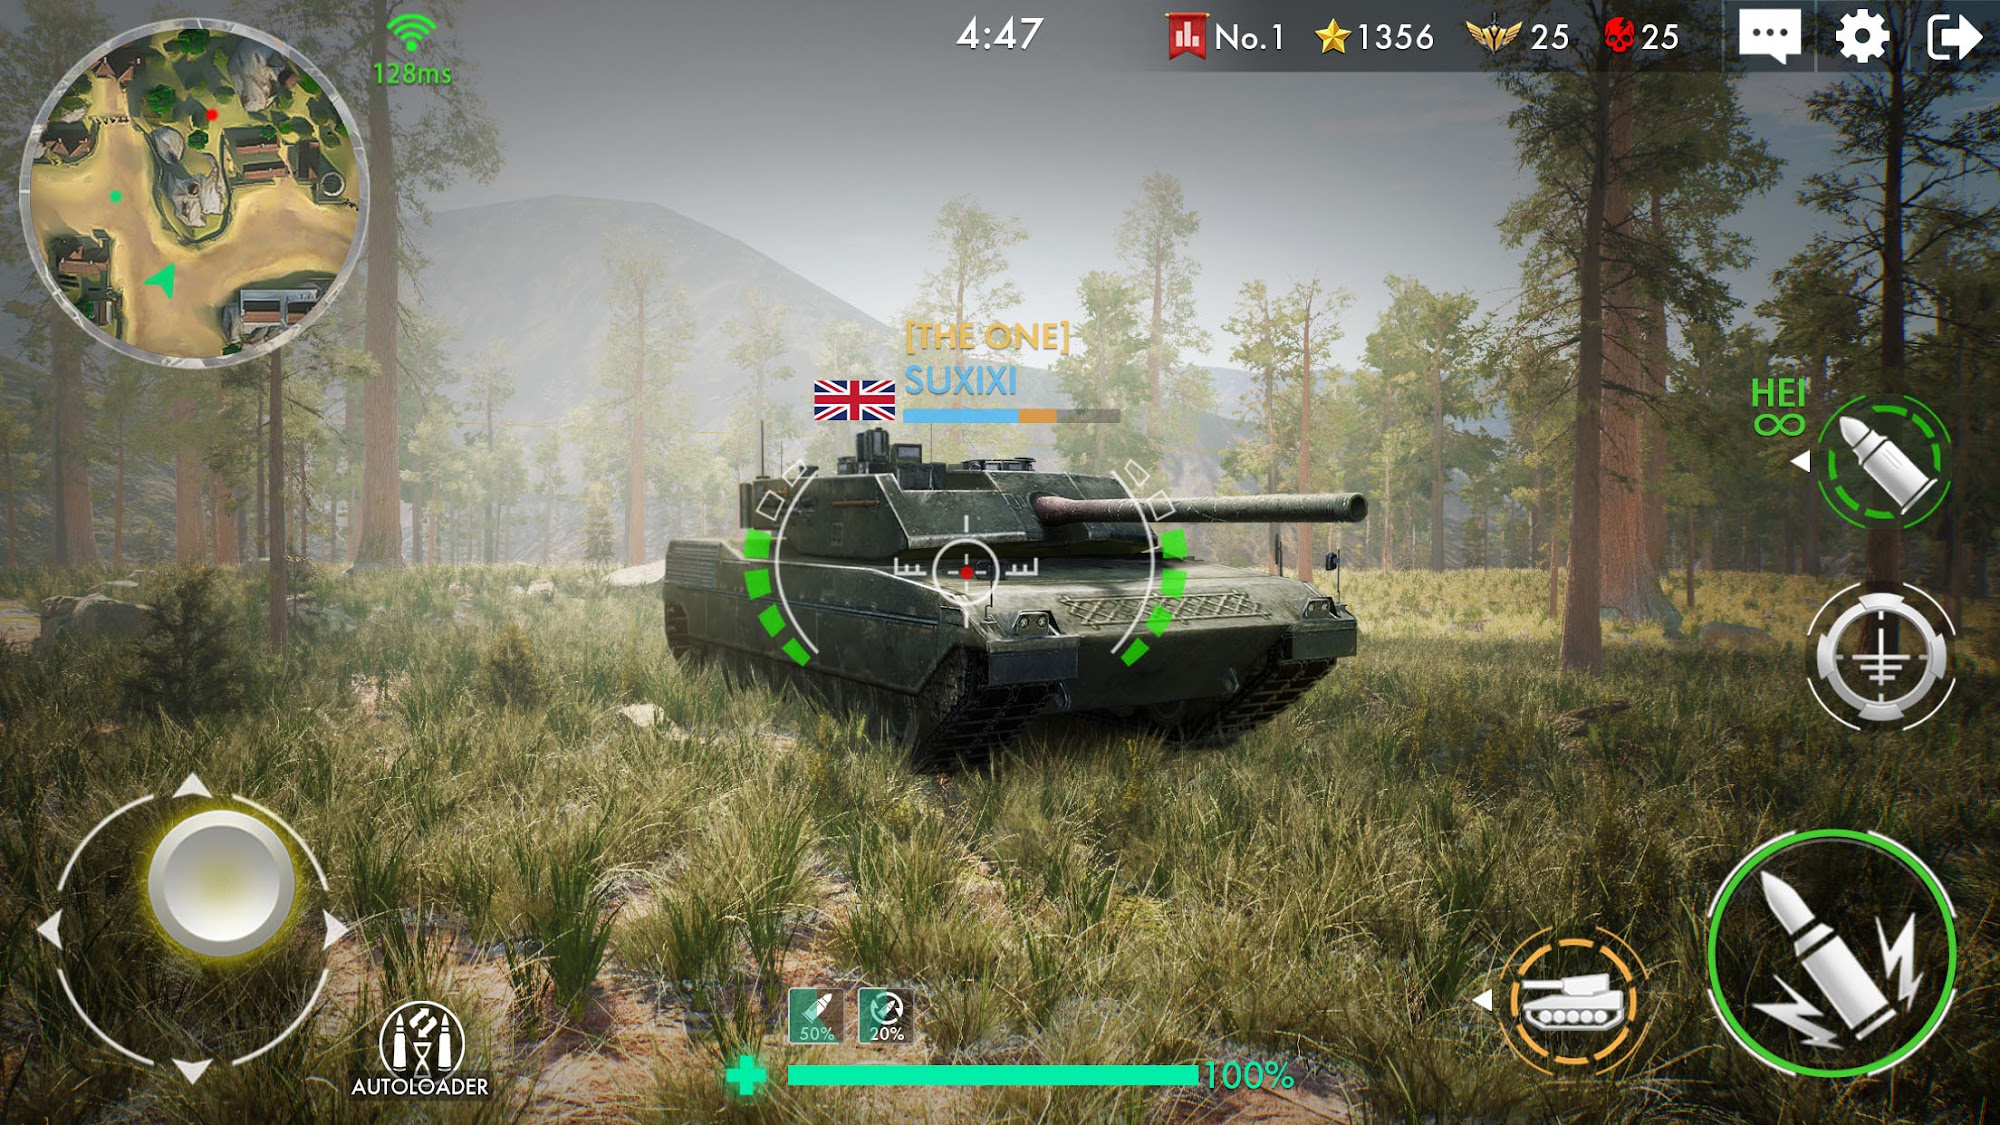 Tank Warfare: PvP Battle Game for Android